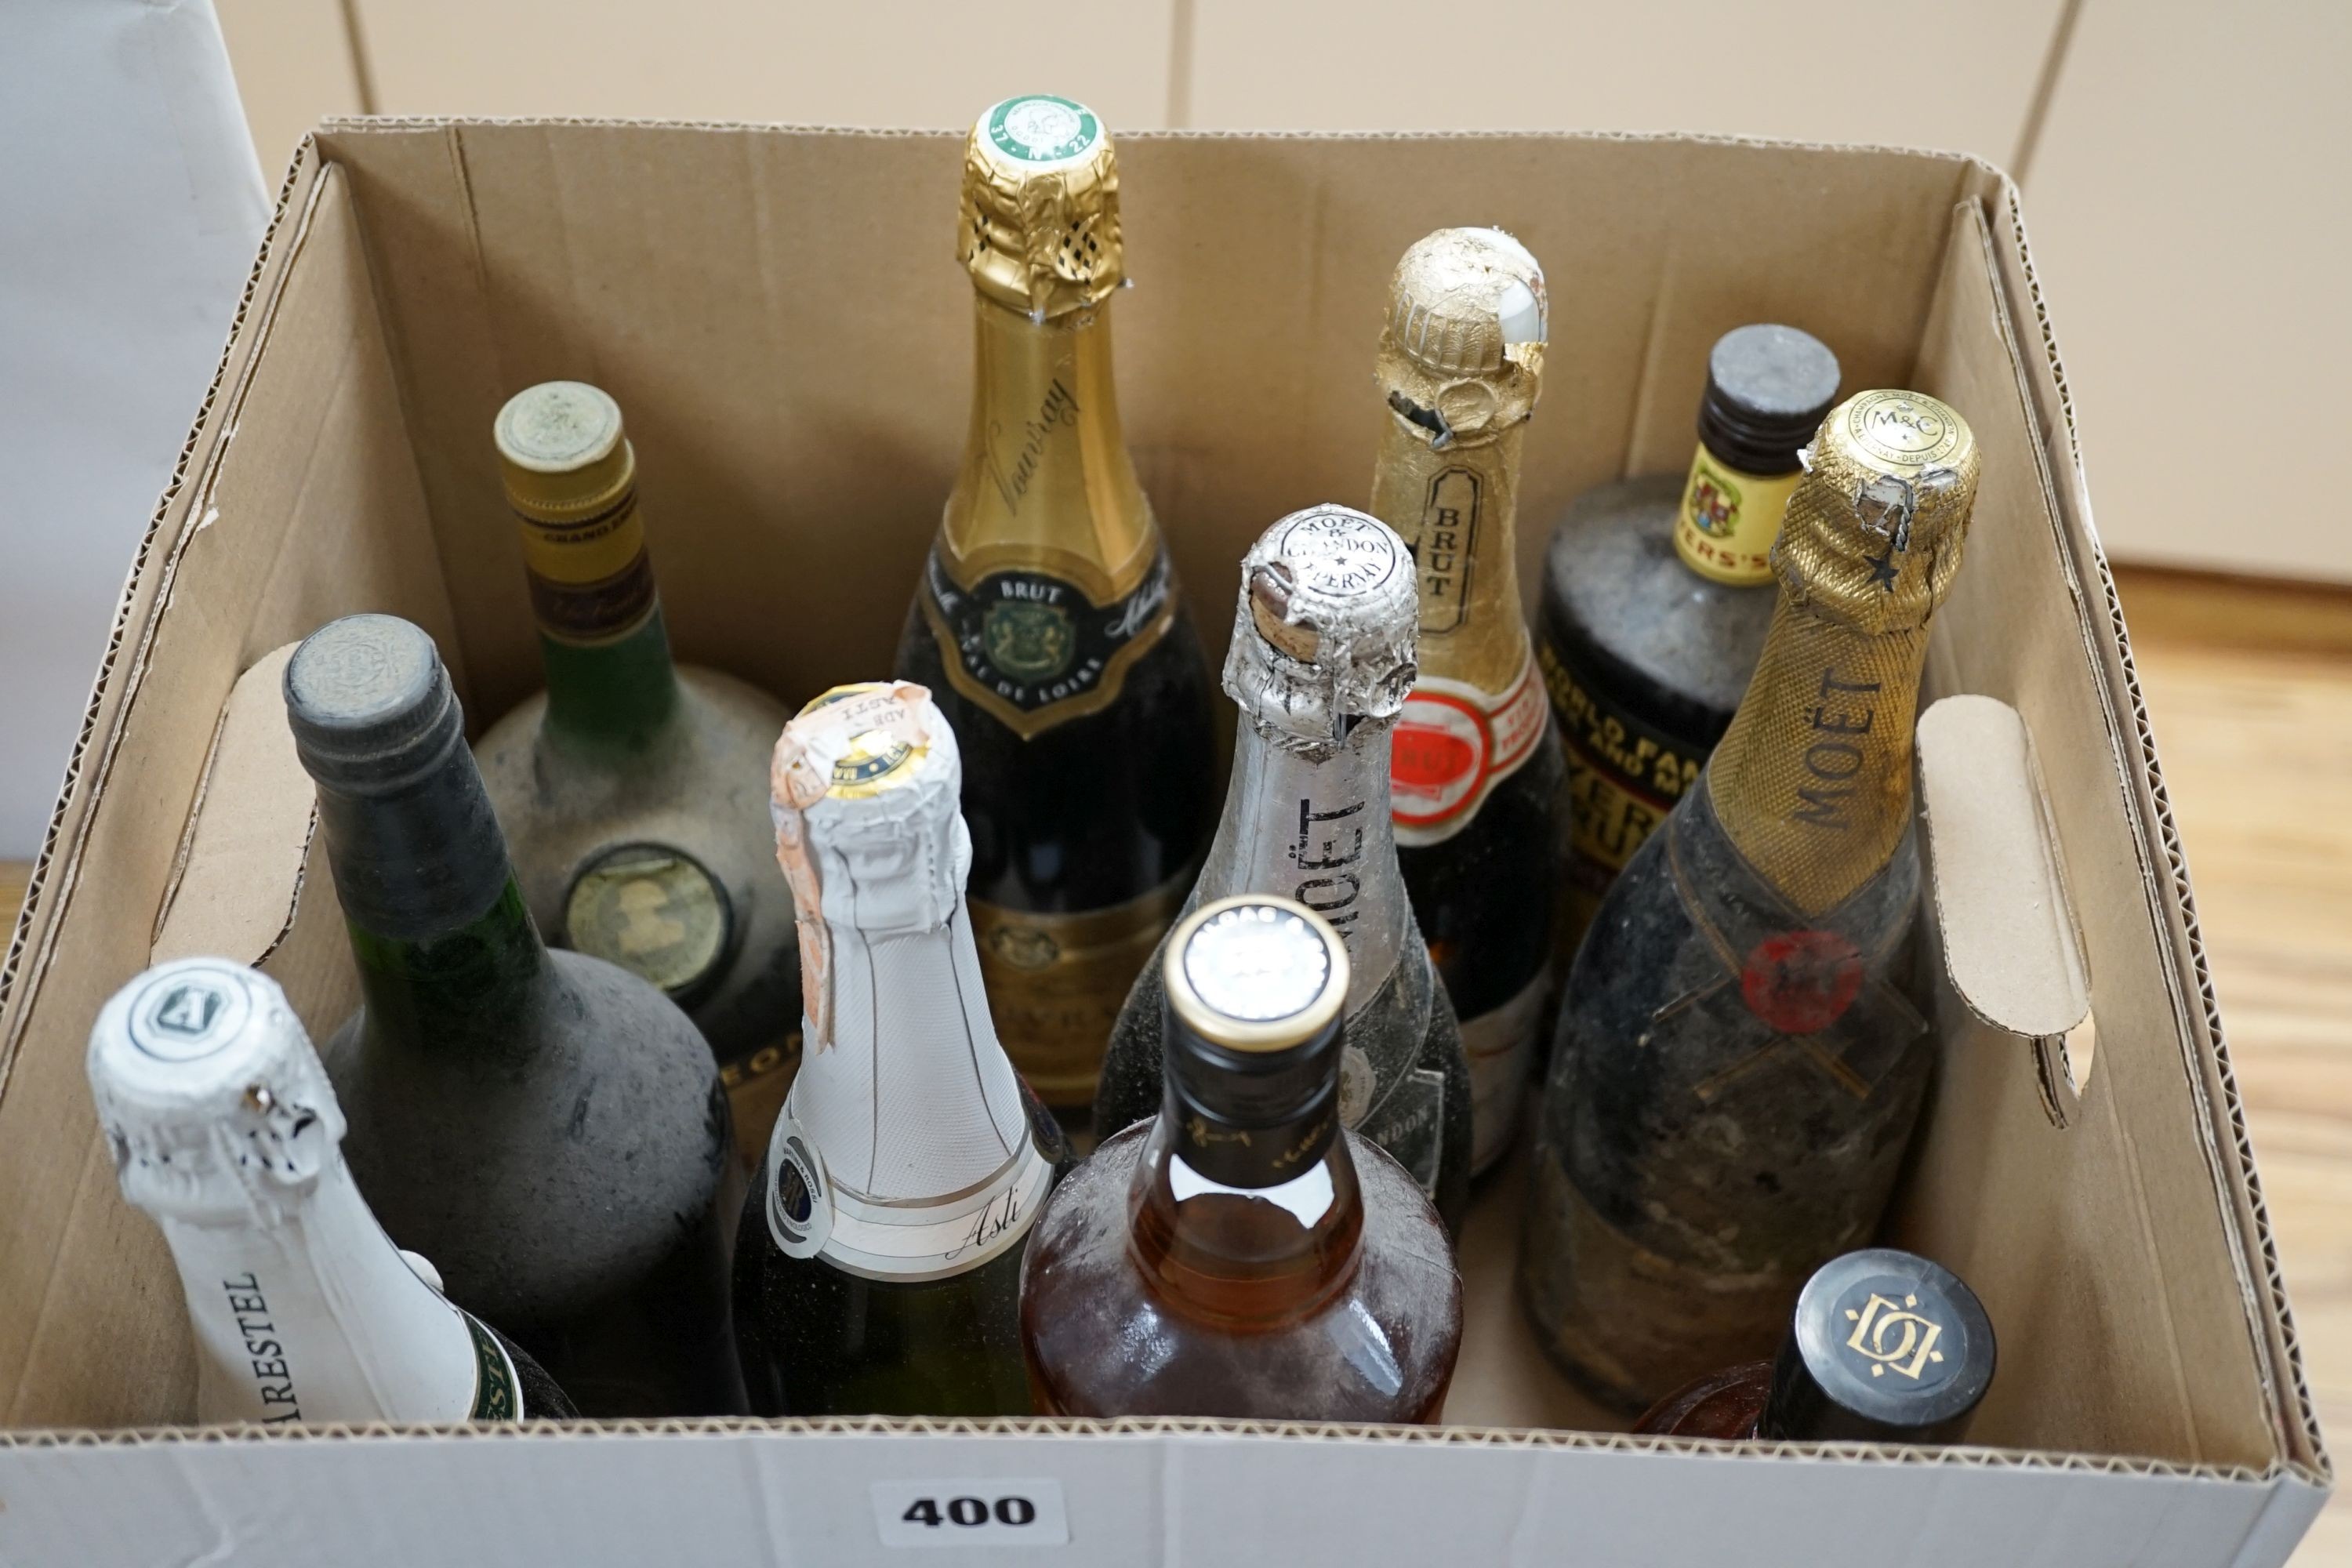 Champagnes, sparkling wines etc (12 bottles) including Moet et Chandon 1977 Silver Jubilee and a bottle of Drambuie